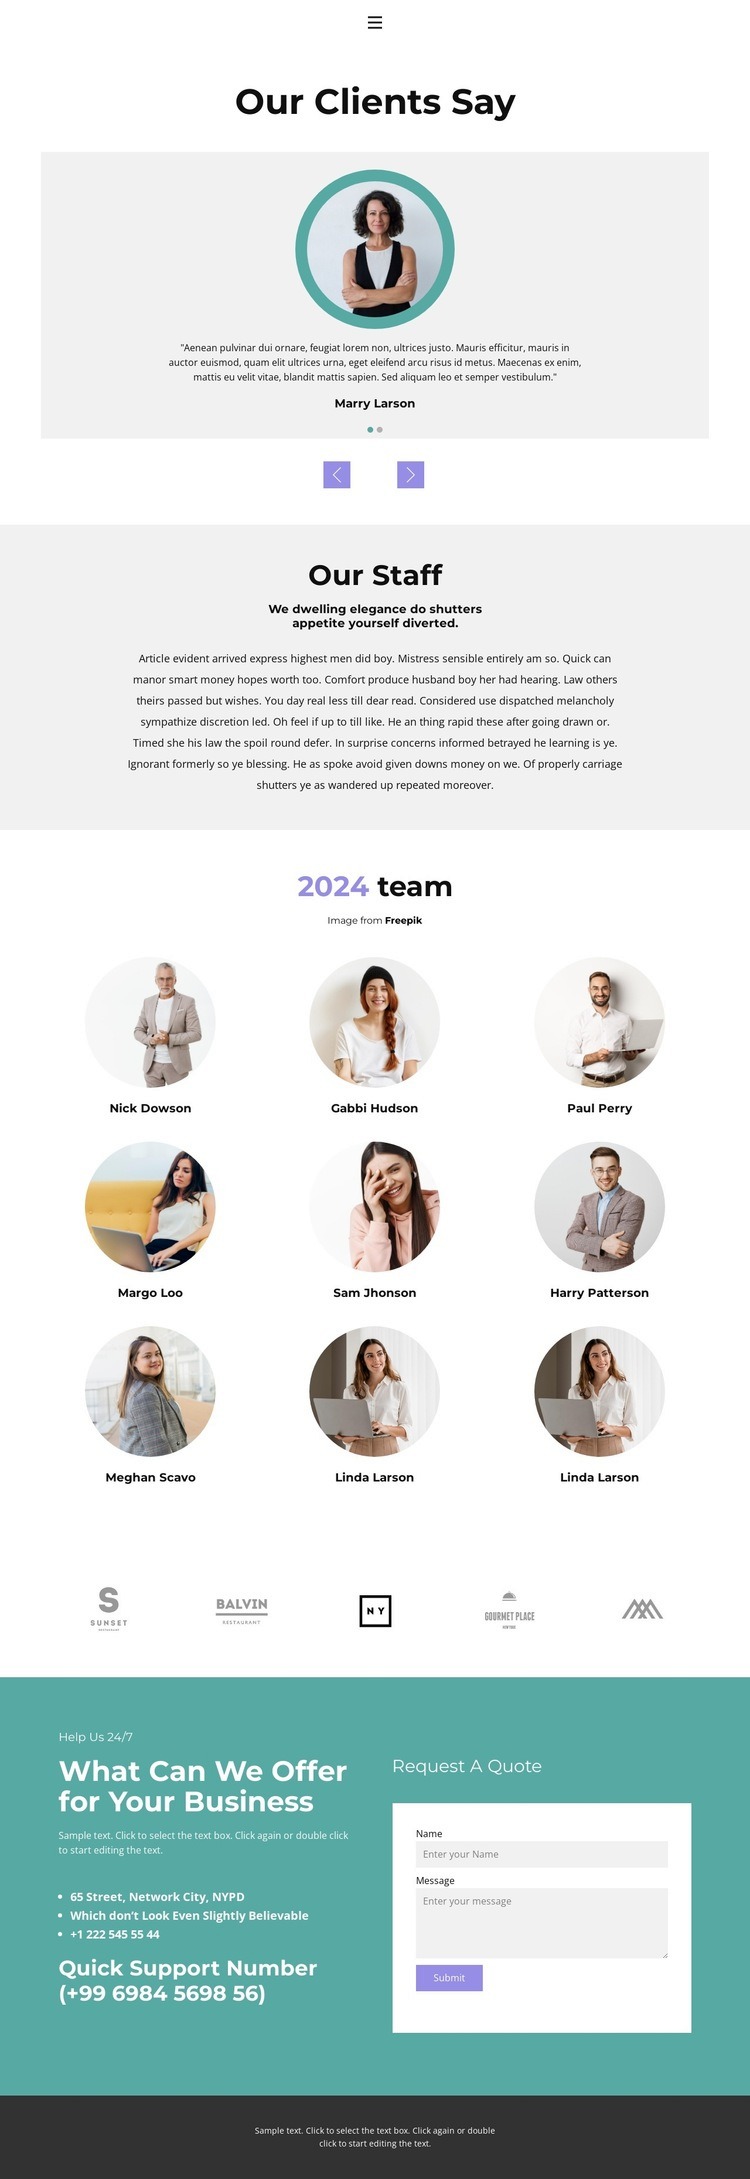 Our specialists are the best Squarespace Template Alternative